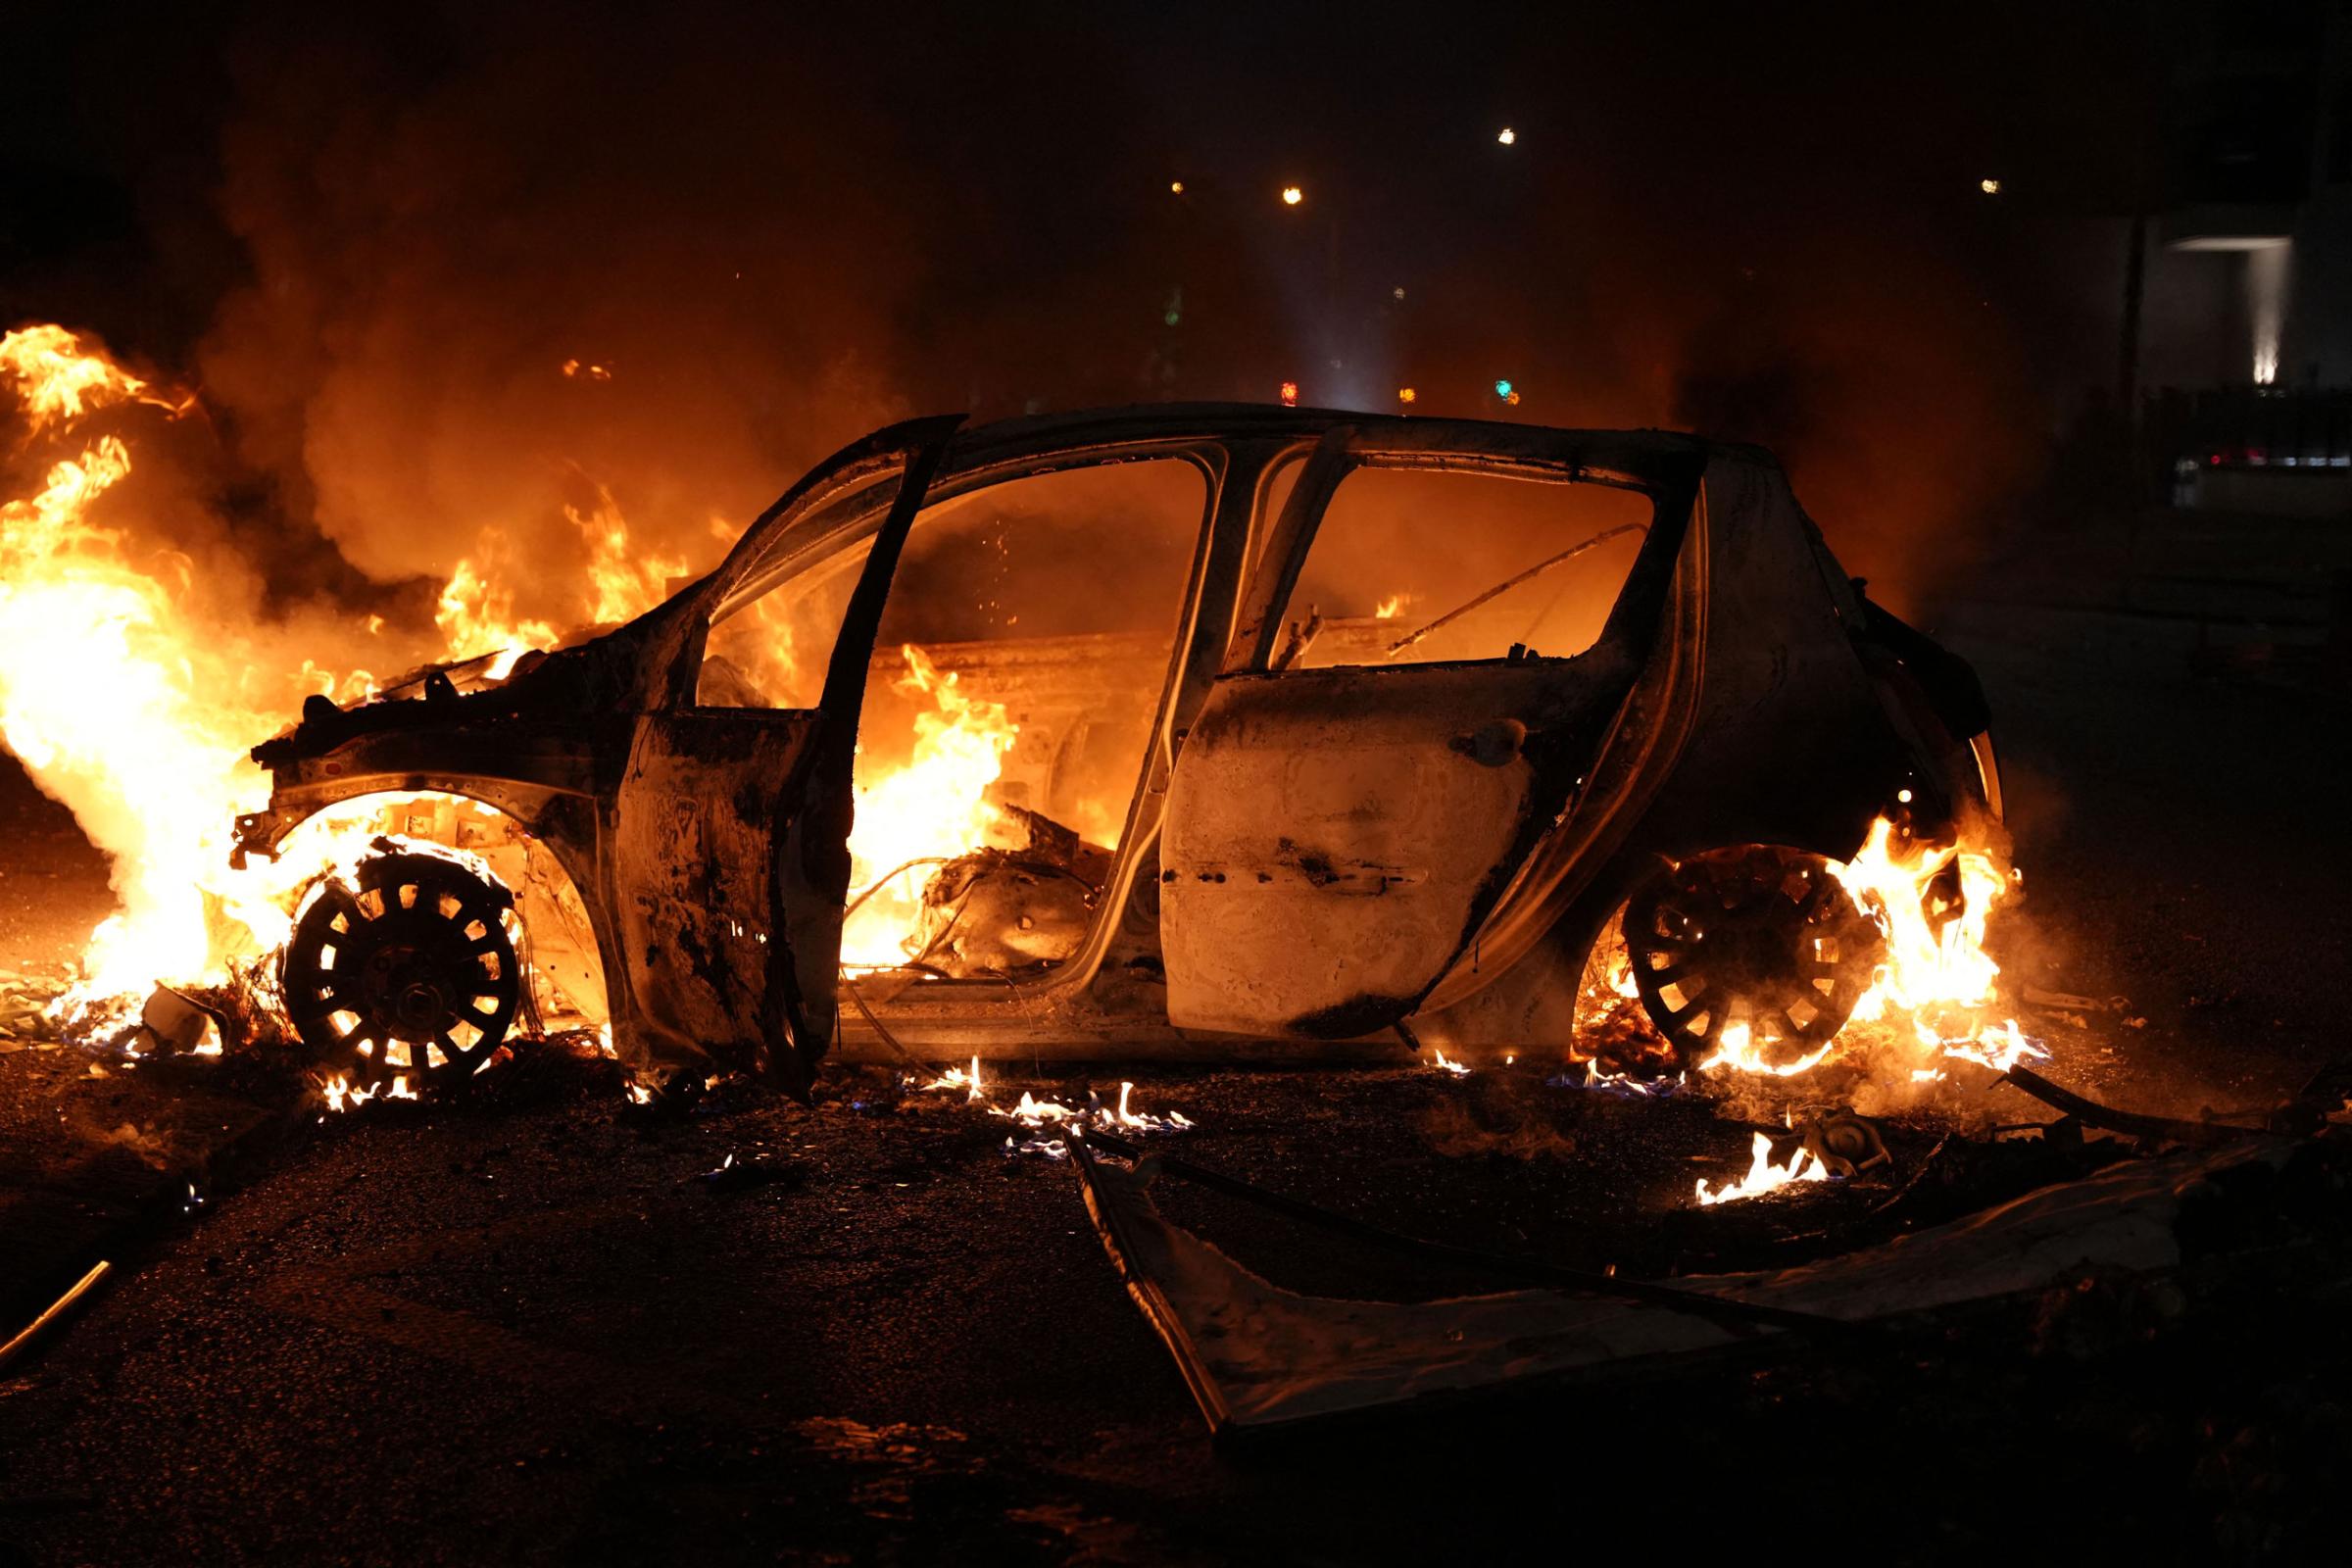 A vehicle burns during a protest in Nanterre